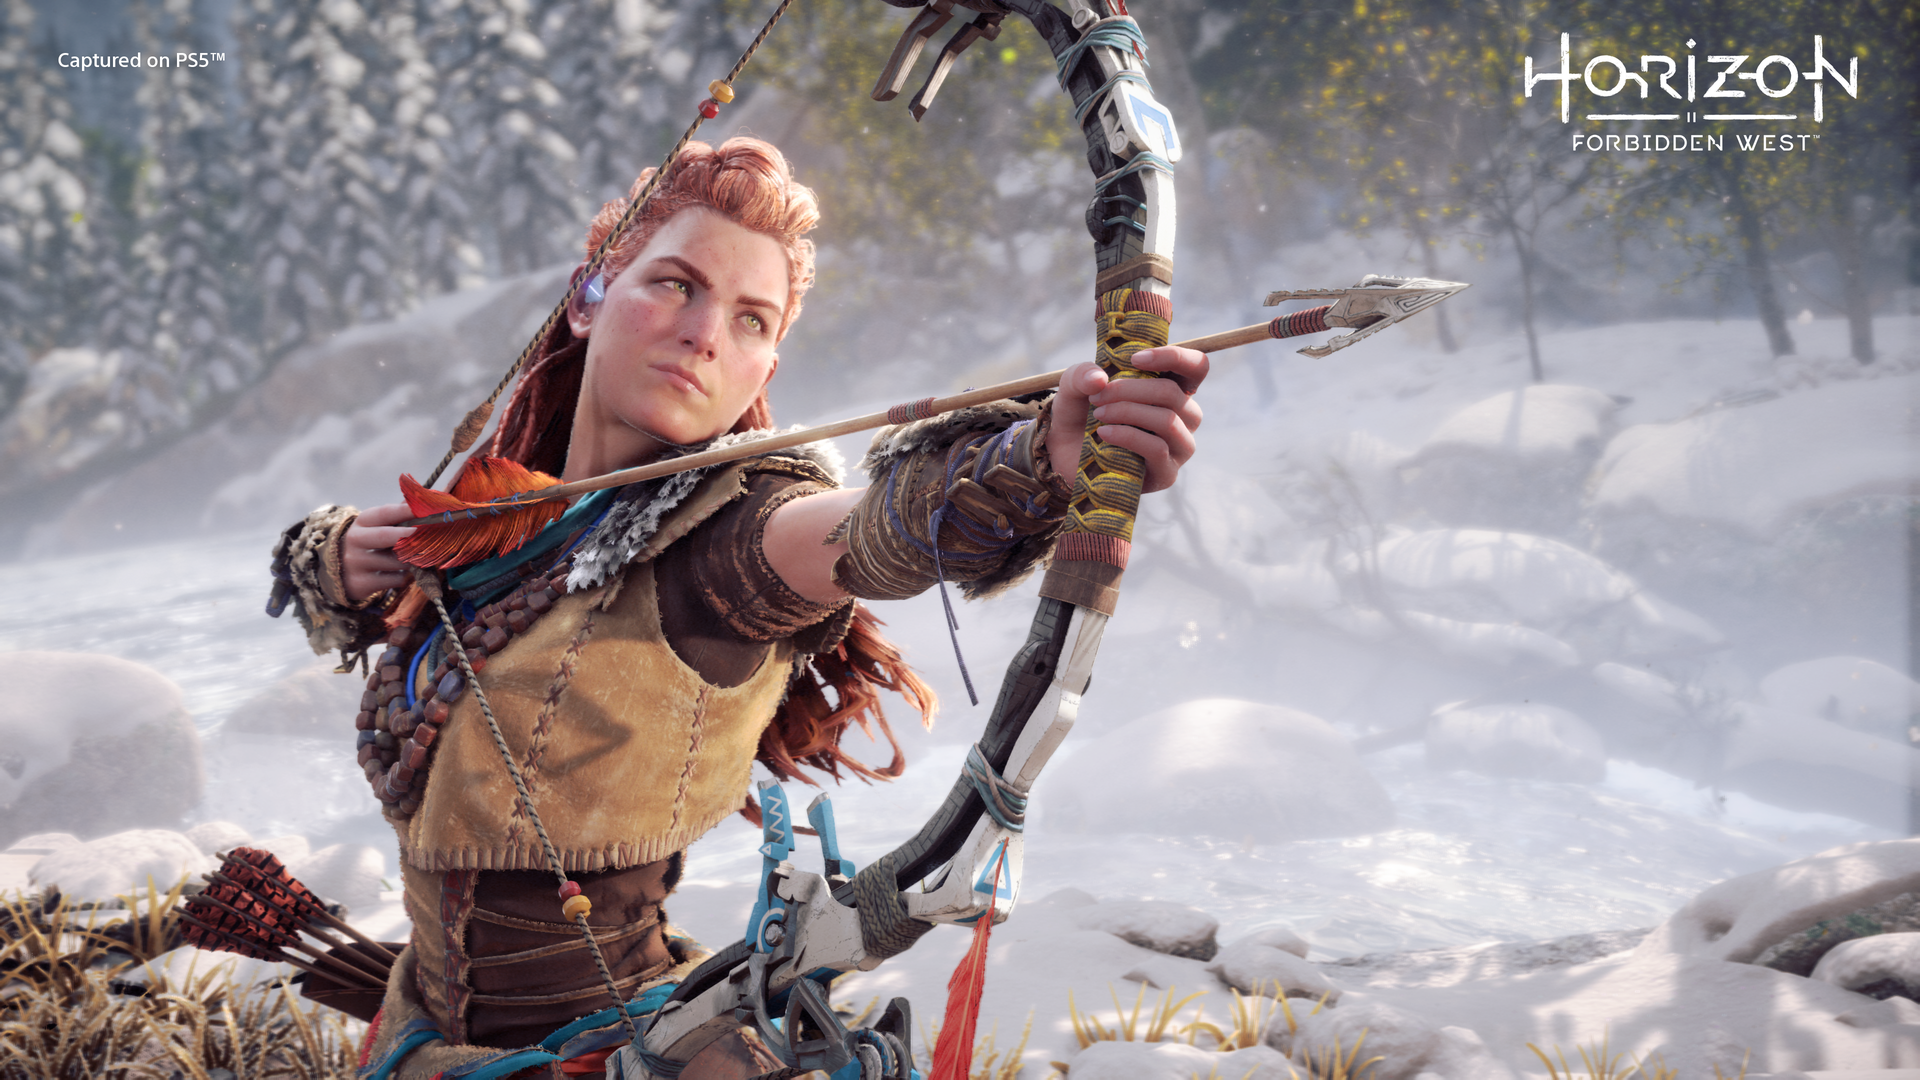 Video game image of a red-haired woman aiming a bow and arrow